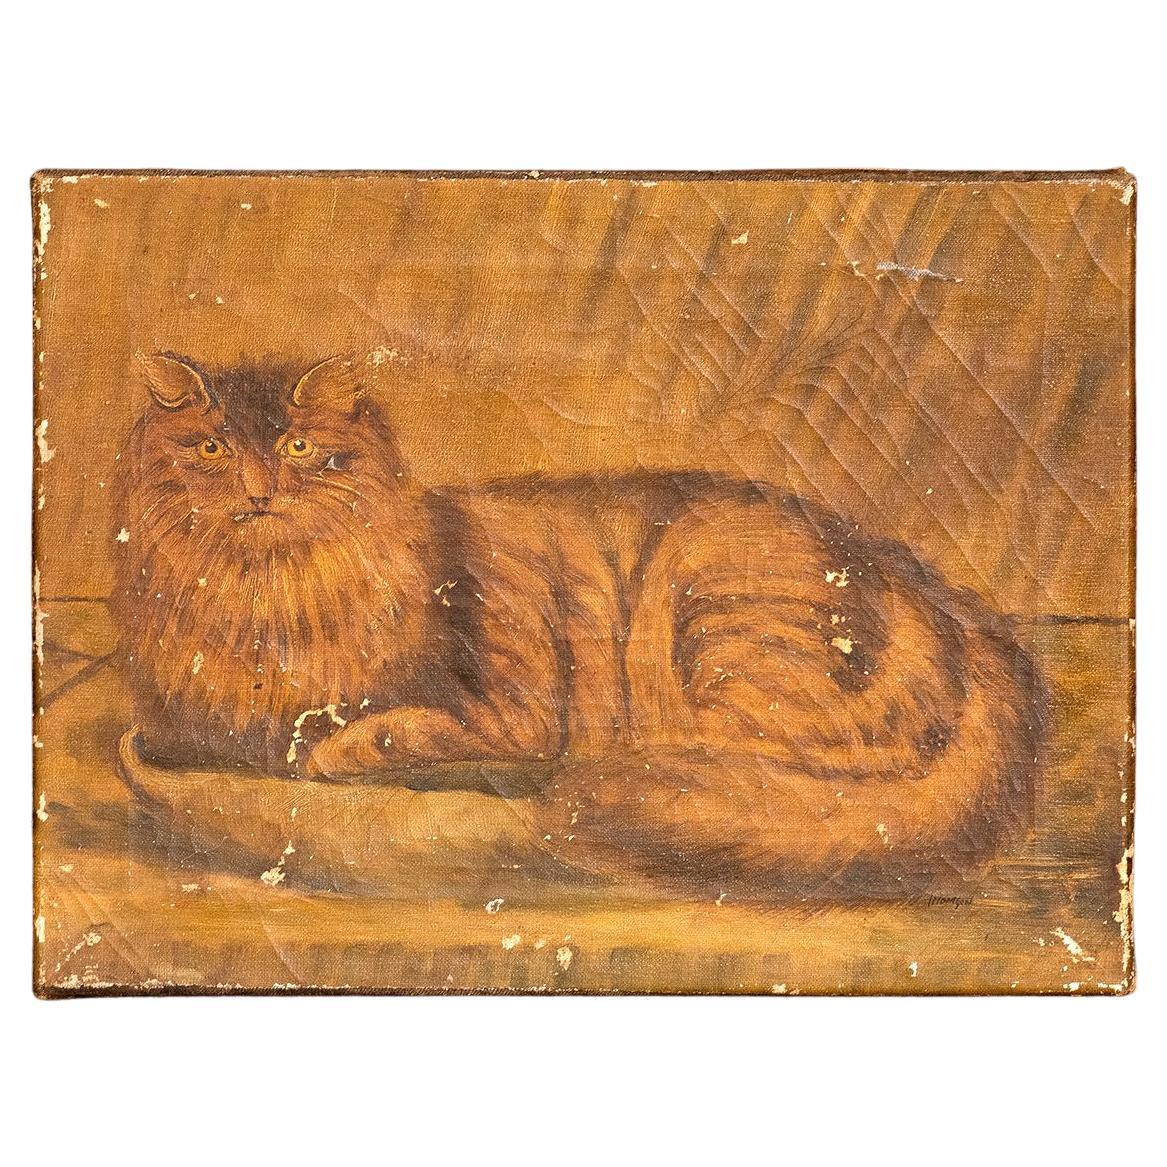 Naive Folk Art Study of a Cat, Oil on Canvas, 19th Century Antique Painting For Sale